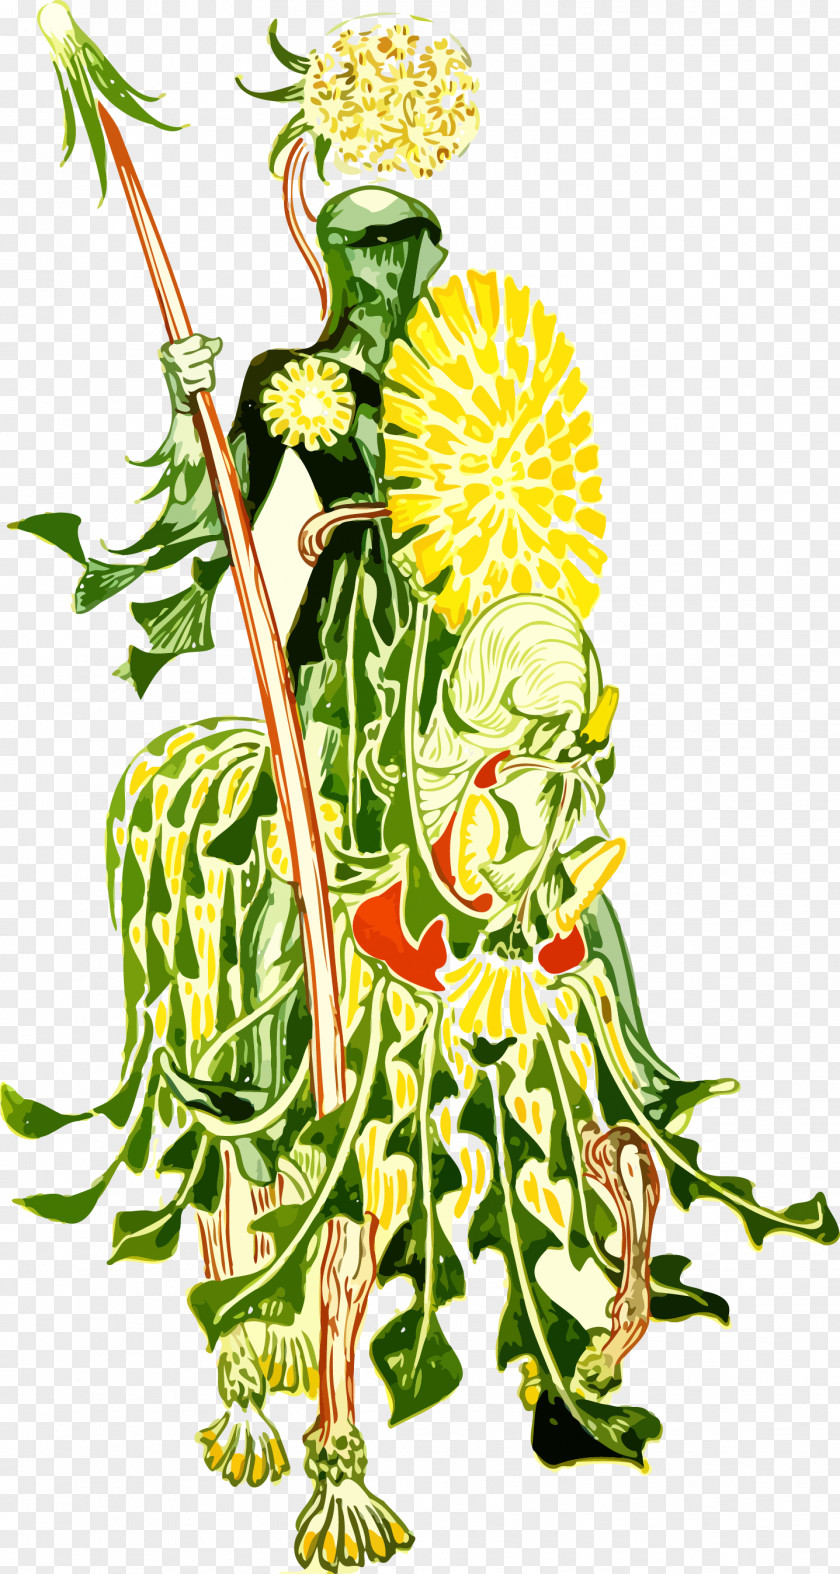 Vector Soldier A Floral Fantasy In An Old English Garden Common Dandelion Knight Illustration PNG